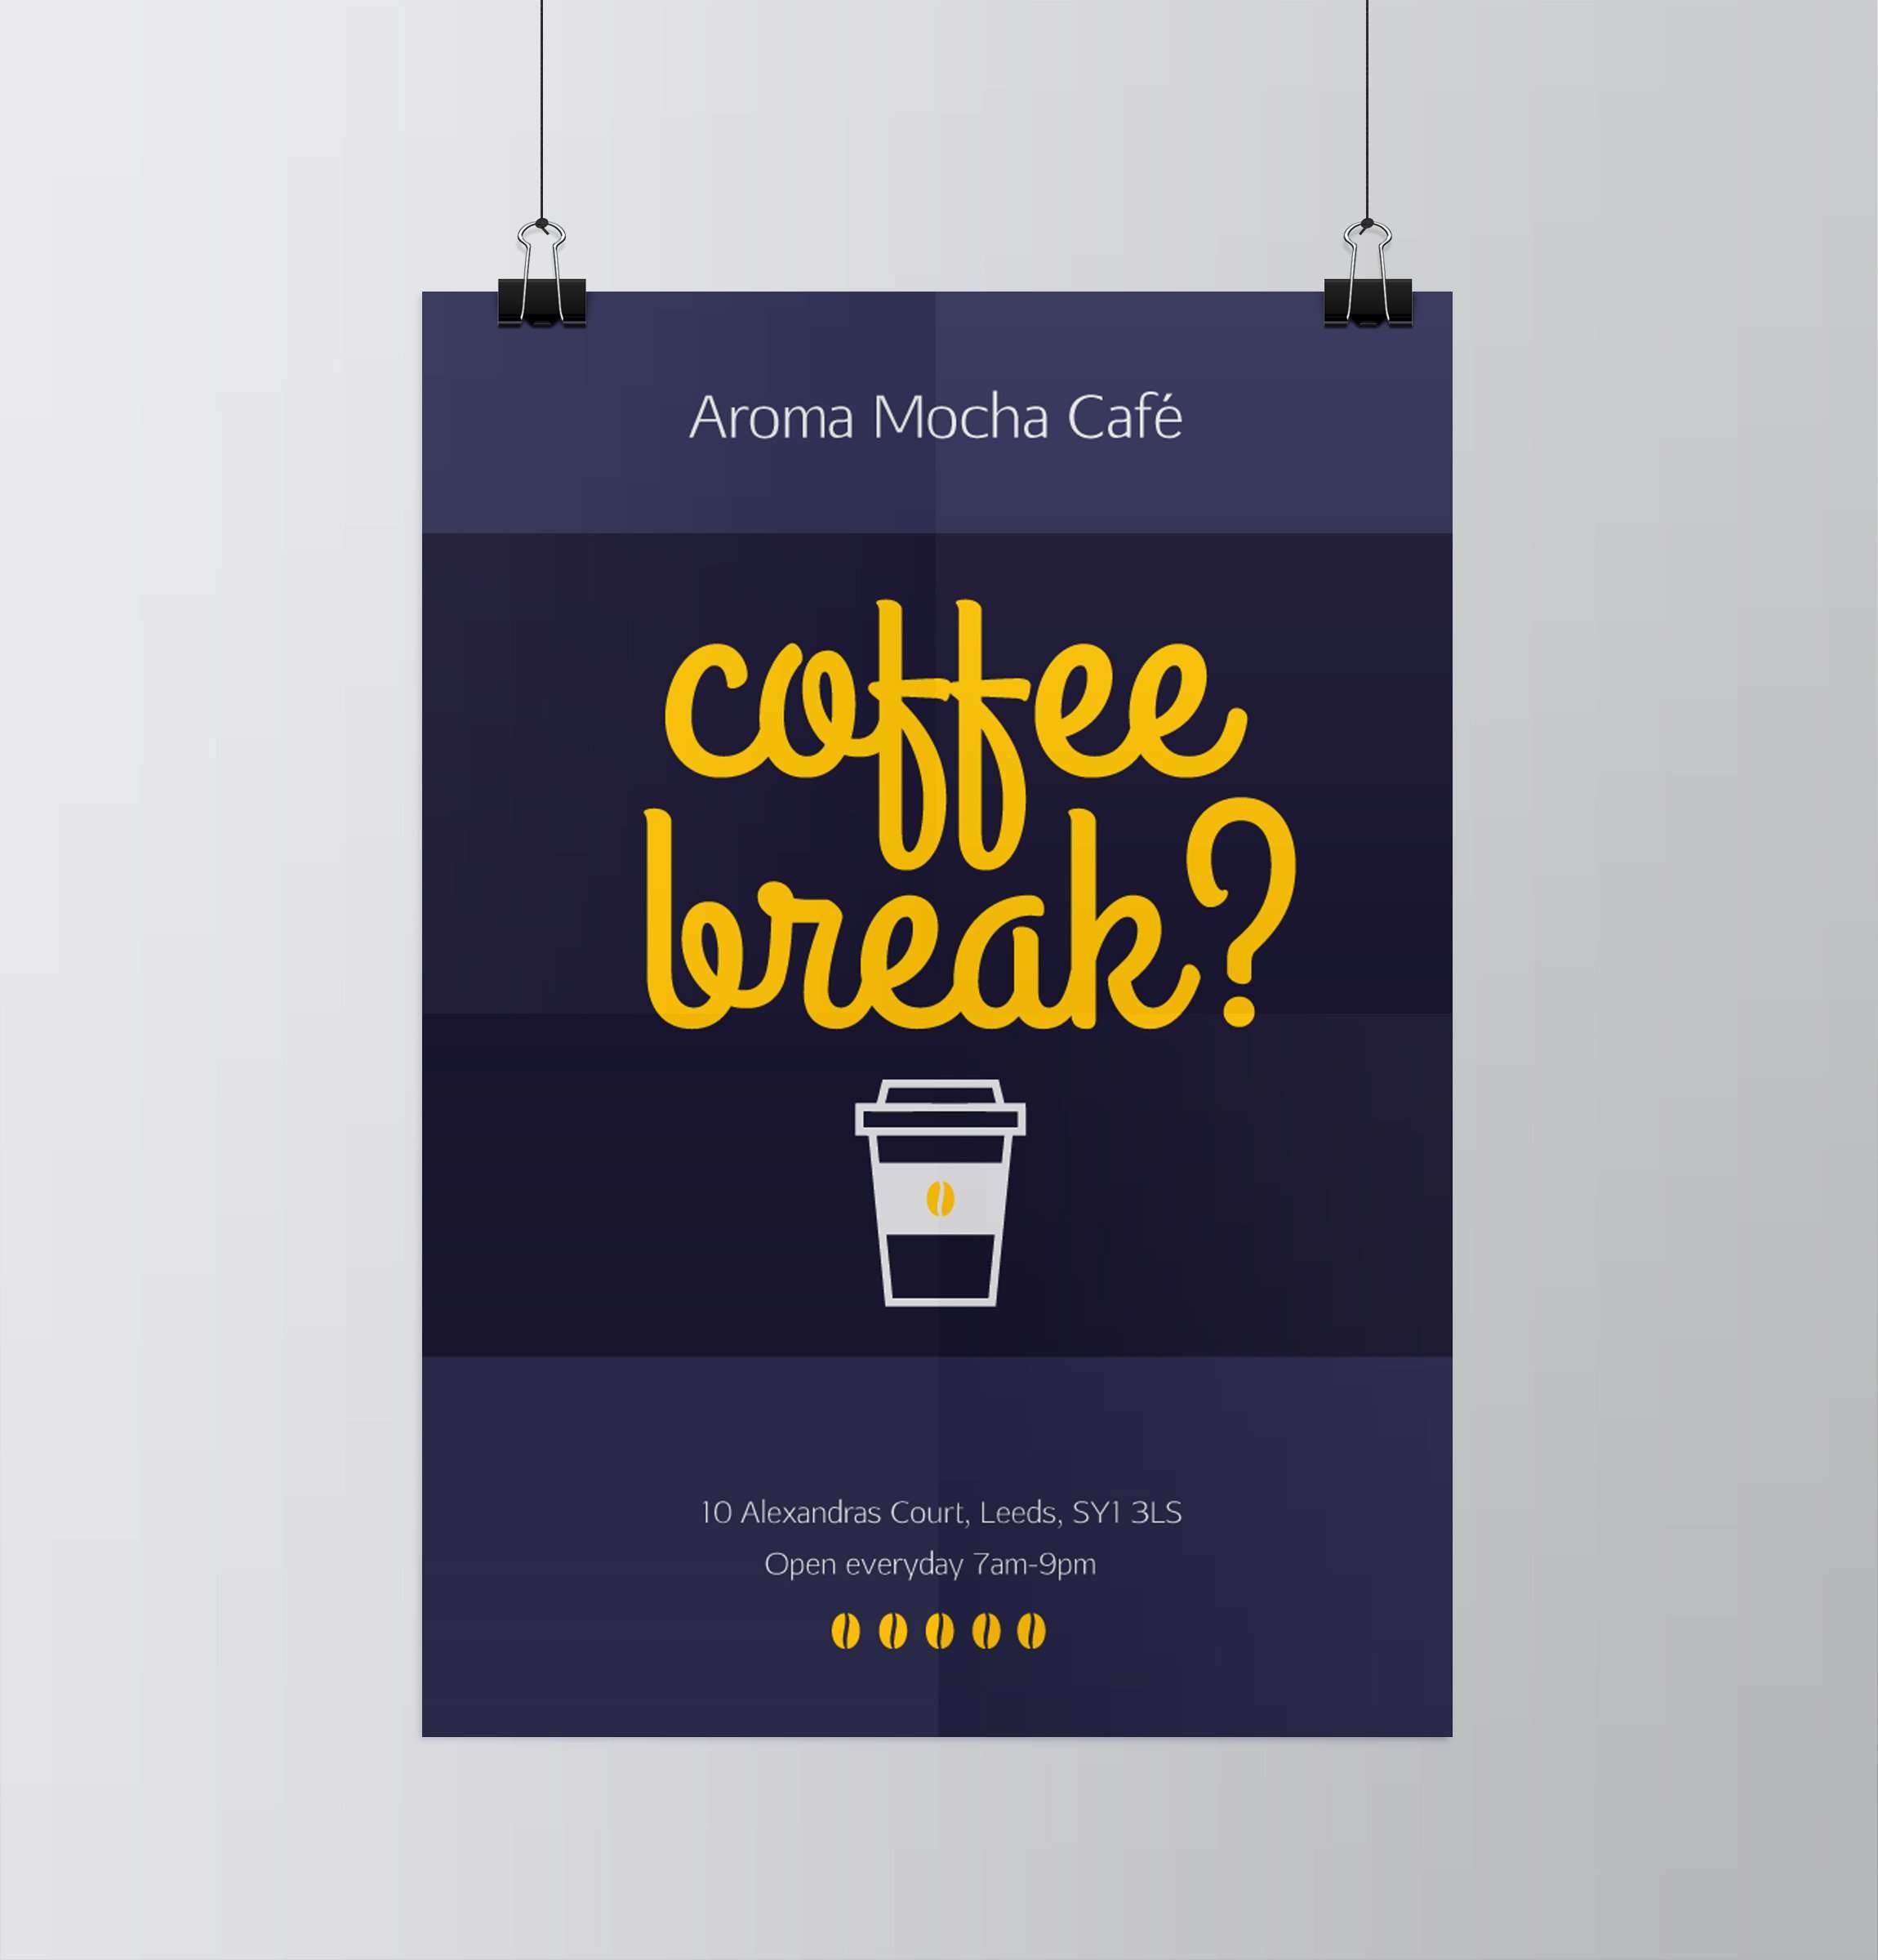 Top 10 New ideas for Coffee Shop promotion